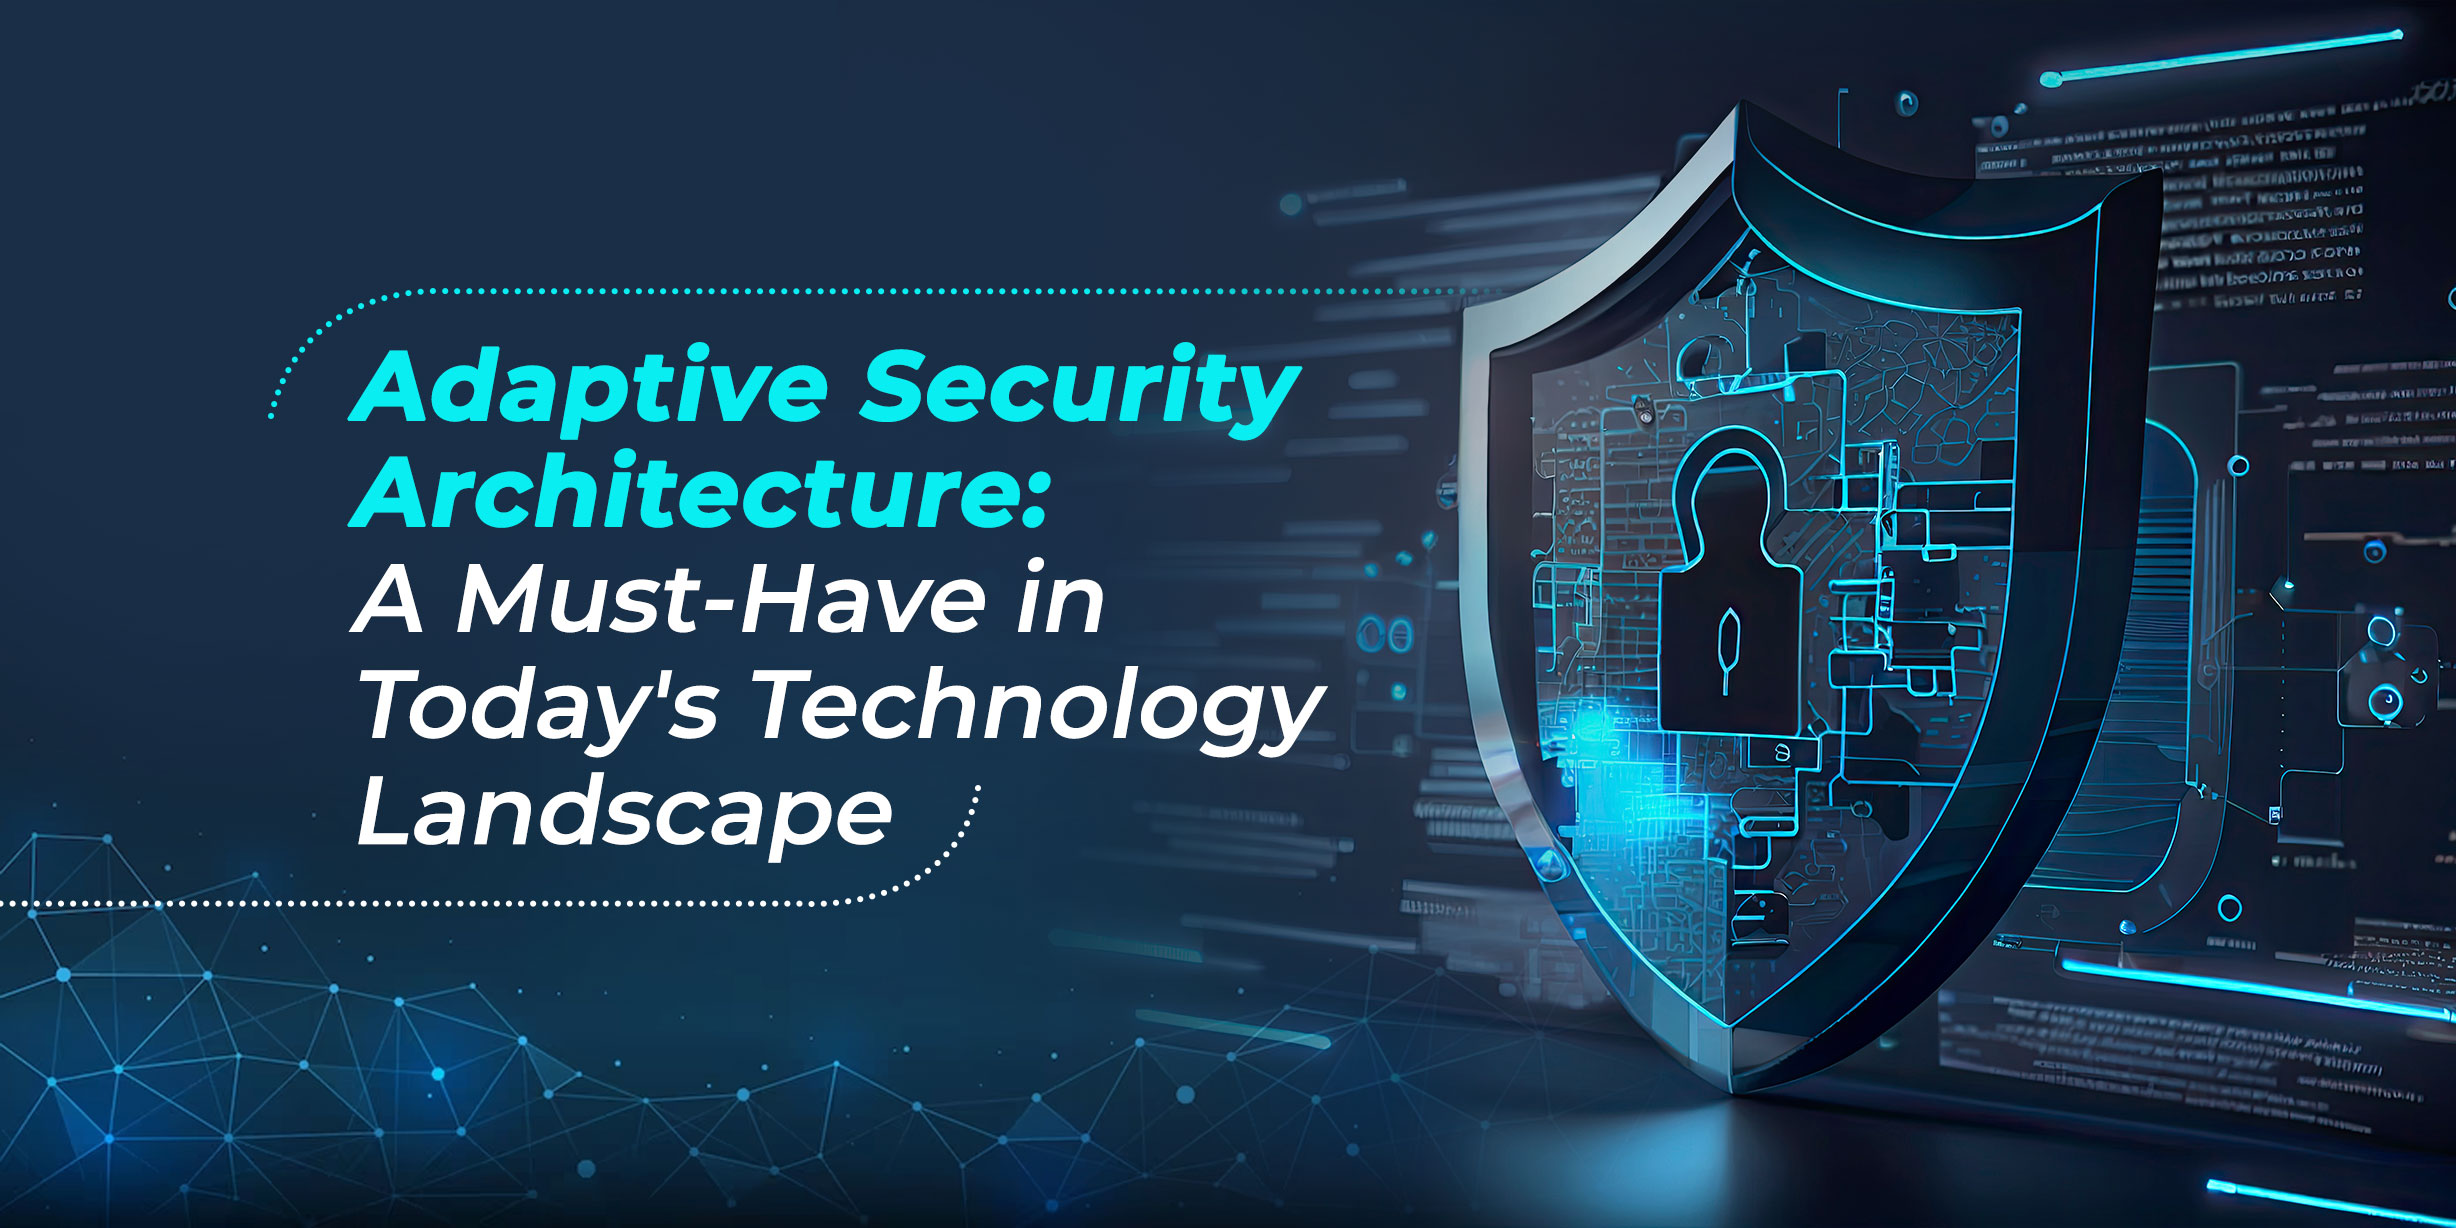 Adaptive Security Architecture: A Must-Have in Today's Technology Landscape